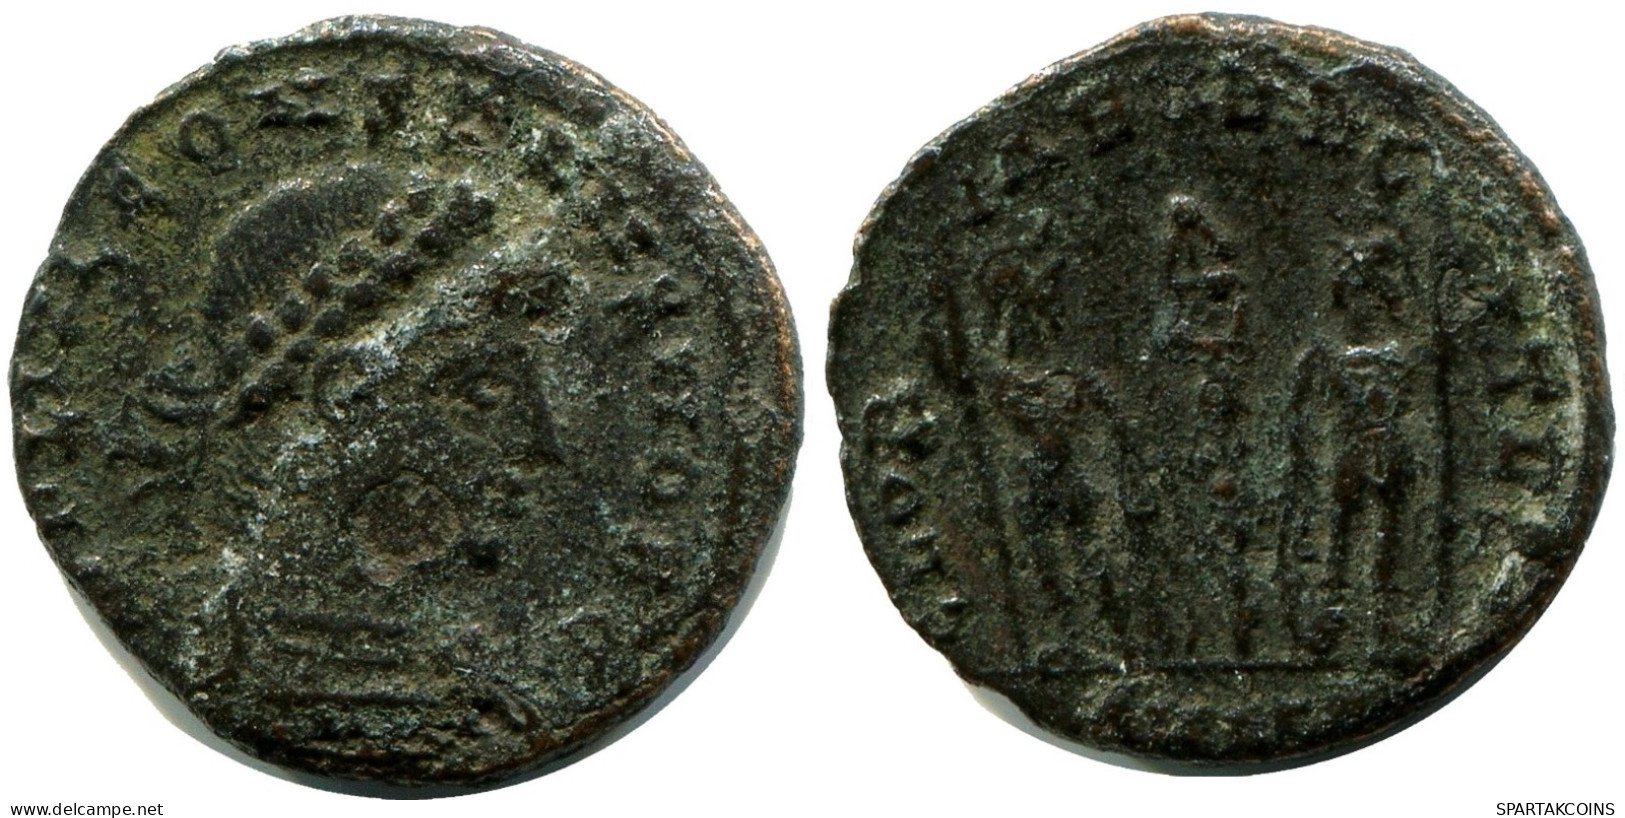 CONSTANS MINTED IN ALEKSANDRIA FROM THE ROYAL ONTARIO MUSEUM #ANC11401.14.F.A - El Impero Christiano (307 / 363)